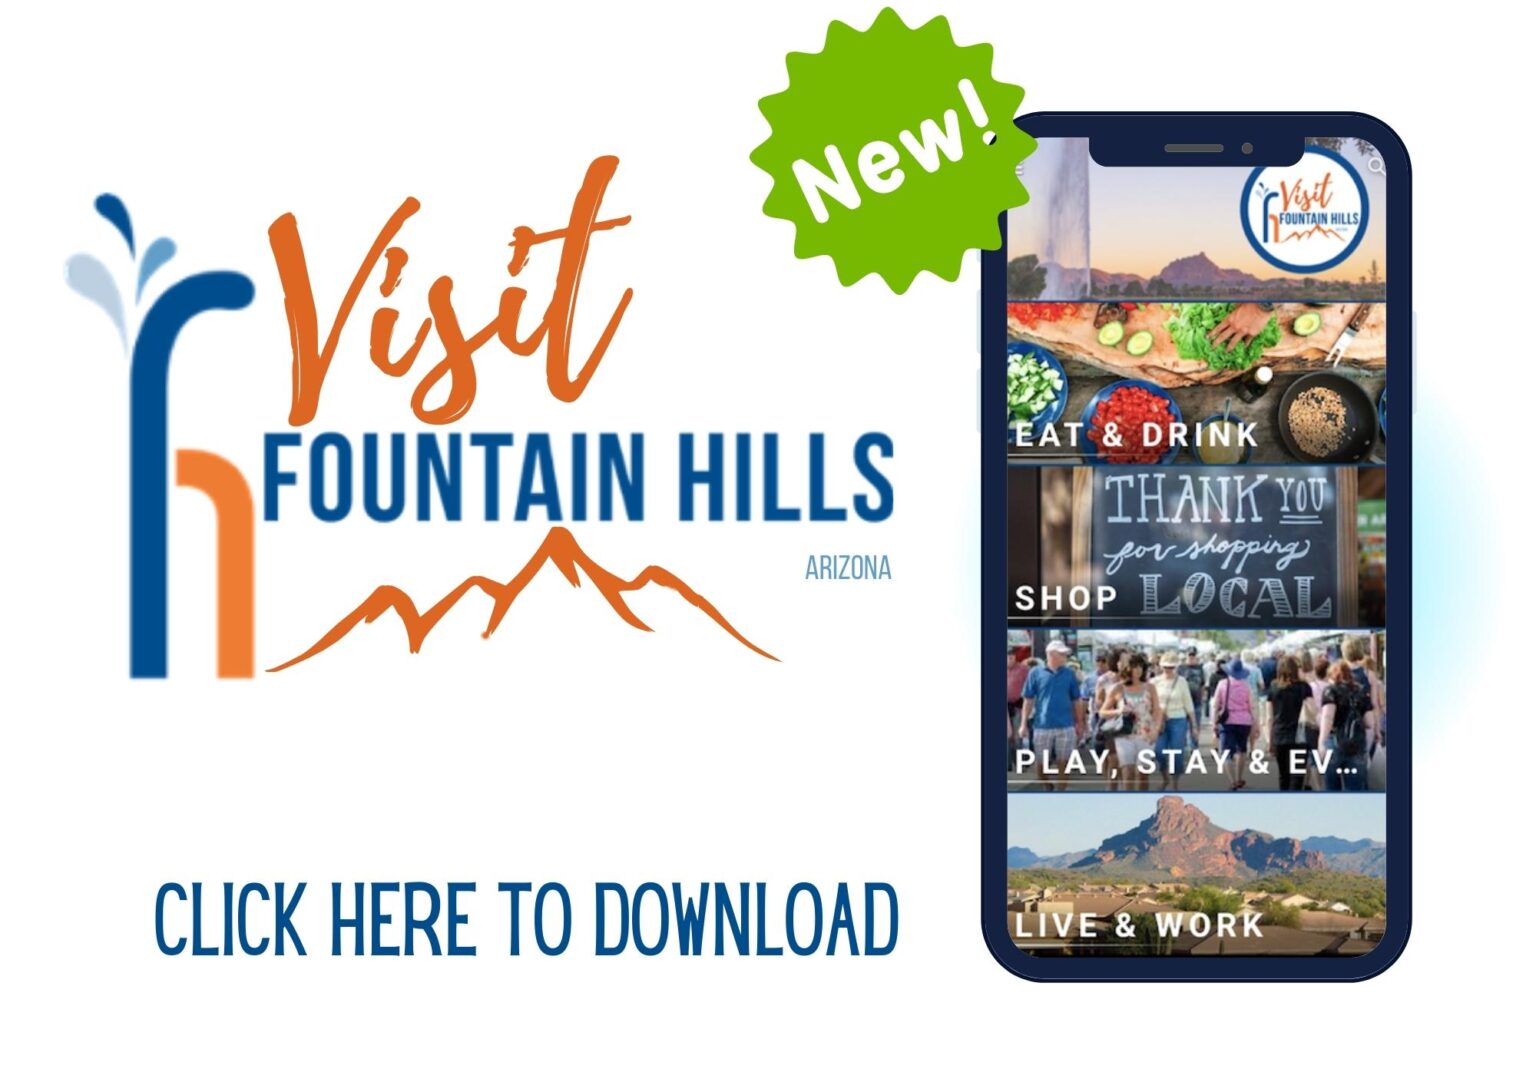 Visit Fountain Hills Fountain Hills Chamber of Commerce